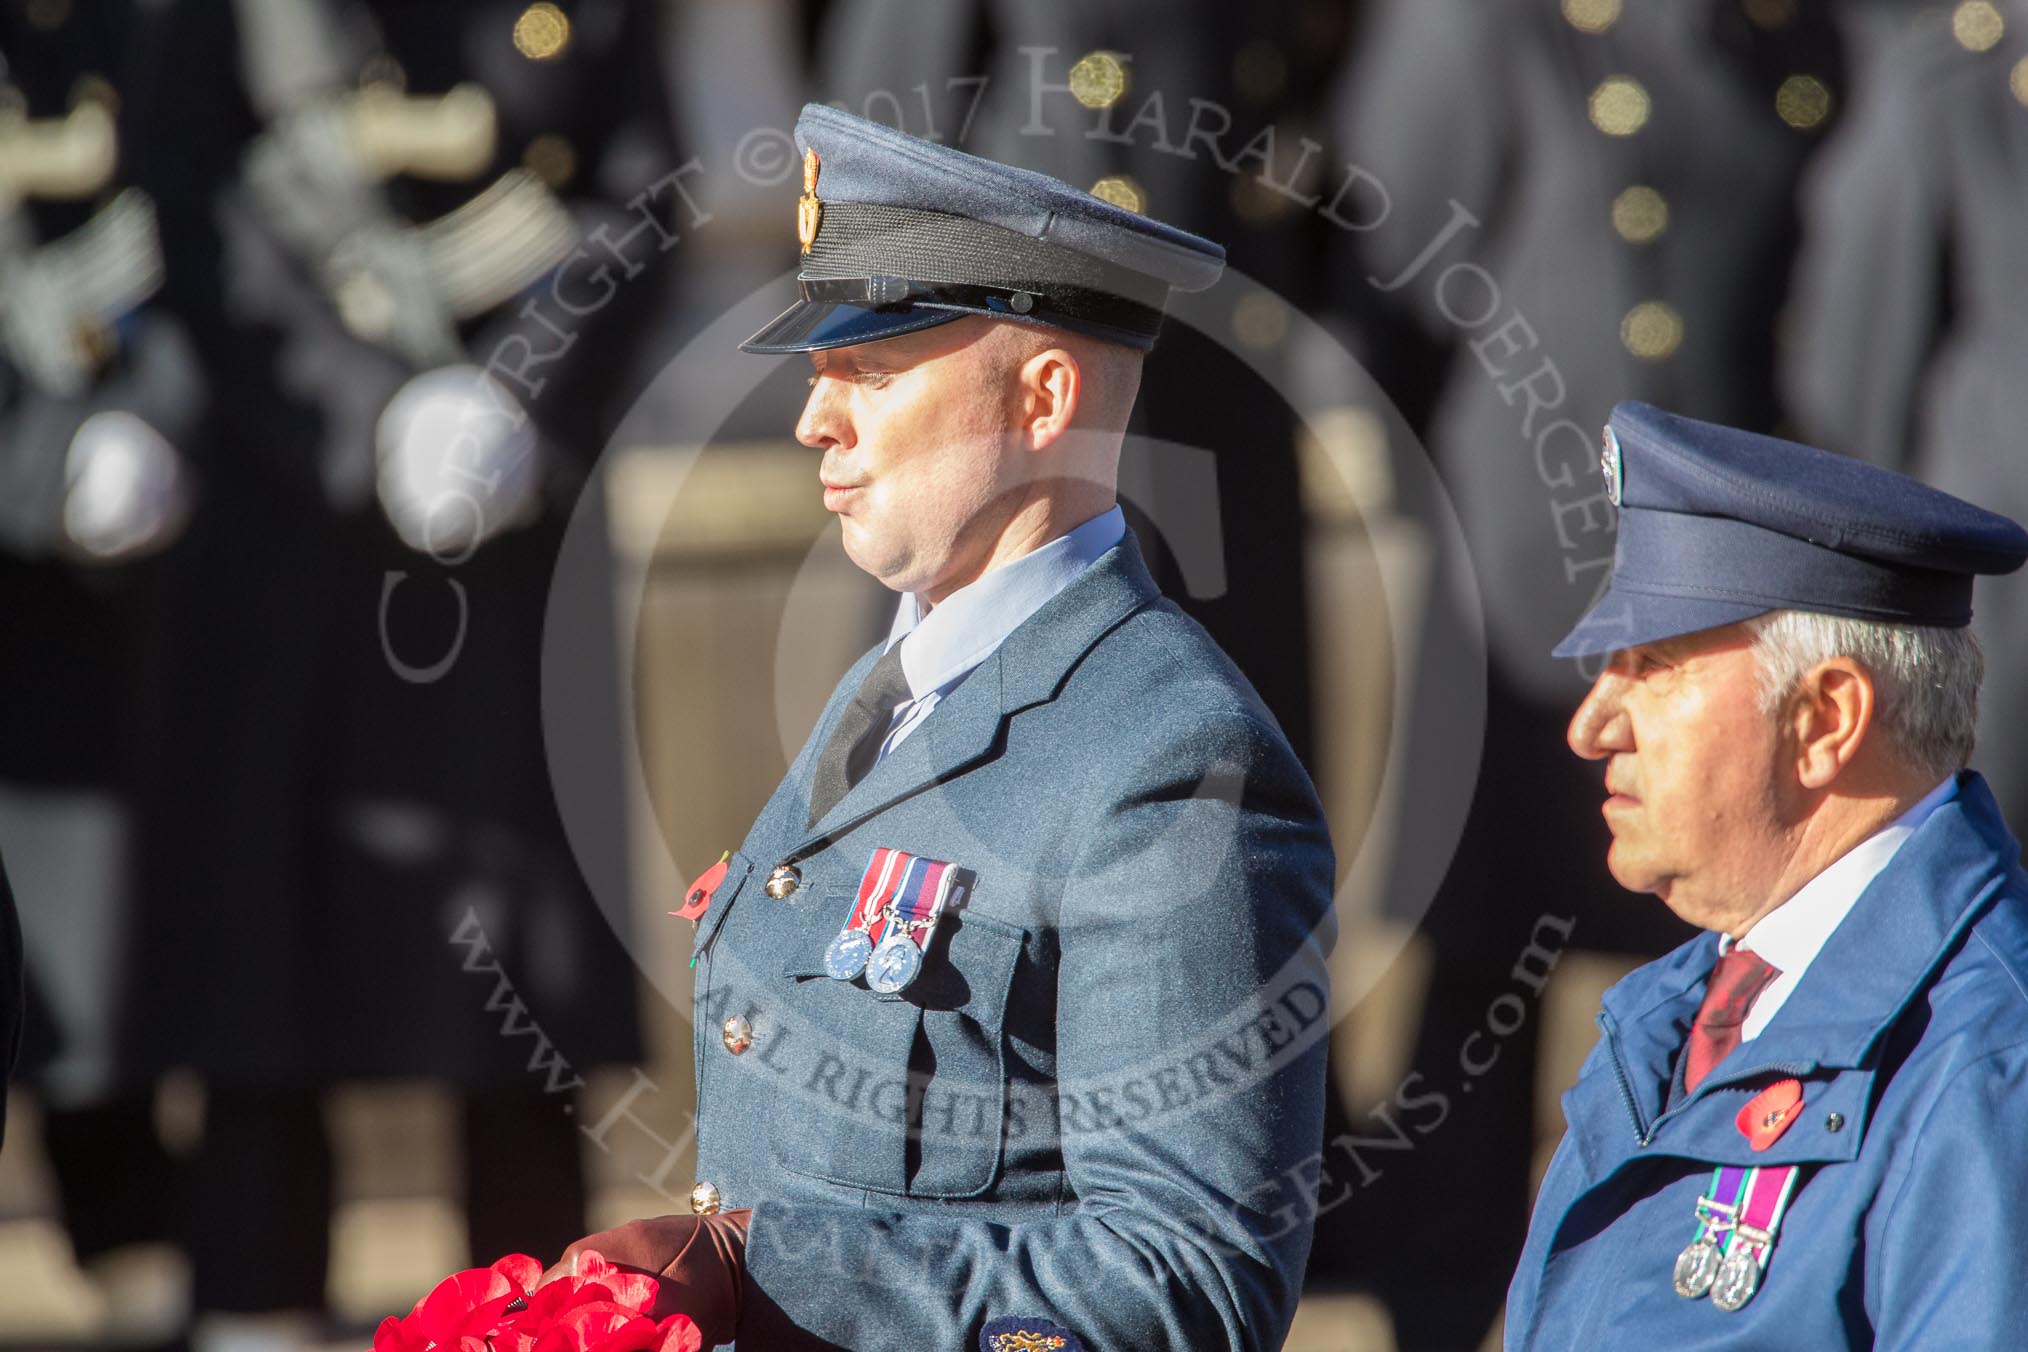 during Remembrance Sunday Cenotaph Ceremony 2018 at Horse Guards Parade, Westminster, London, 11 November 2018, 11:28.